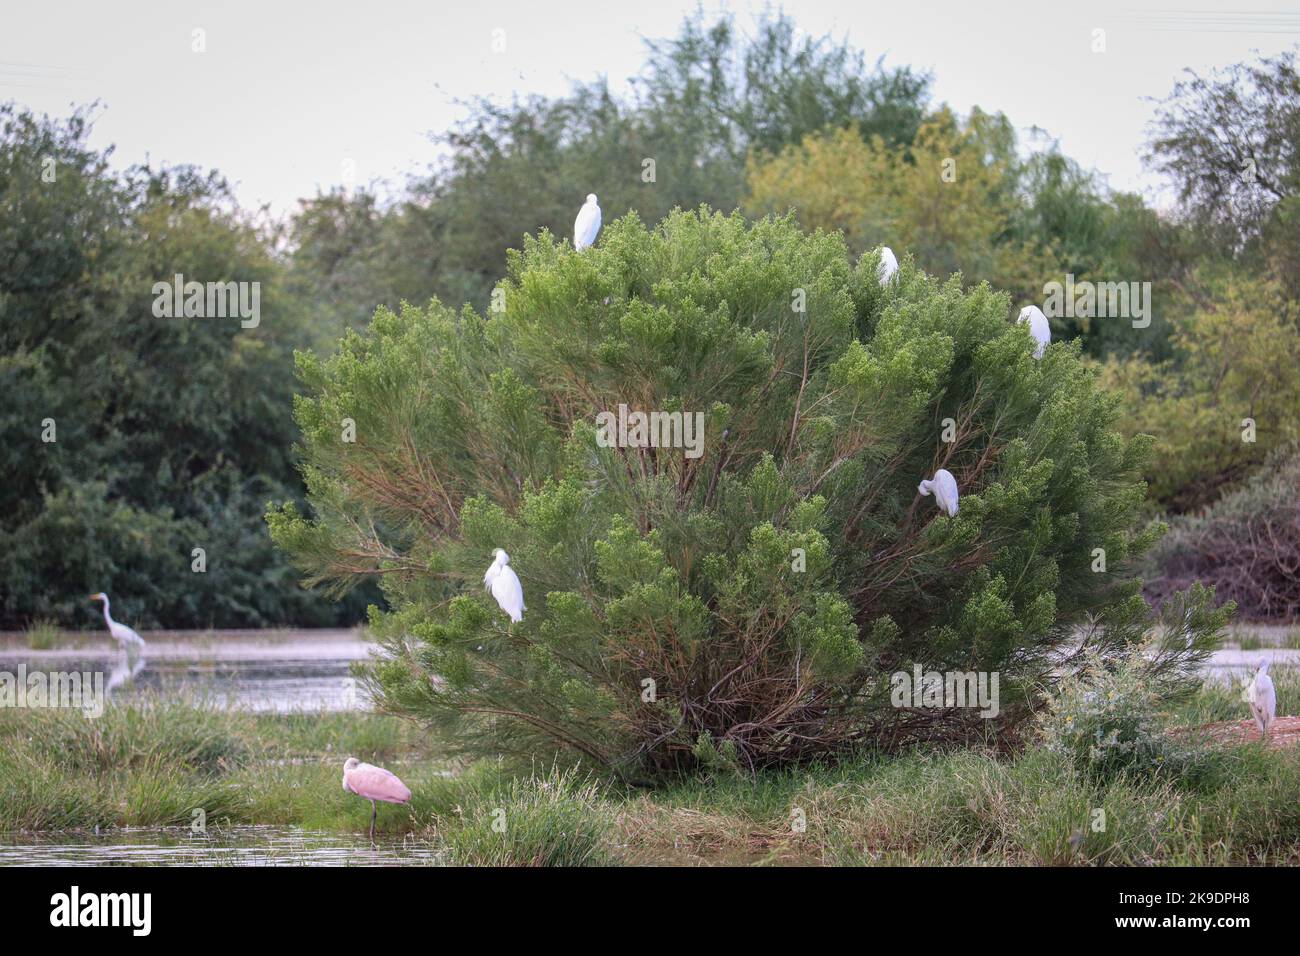 Snowy egrets or Egretta thula roosting in a tree at the Riparian water ranch in Arizona. Stock Photo